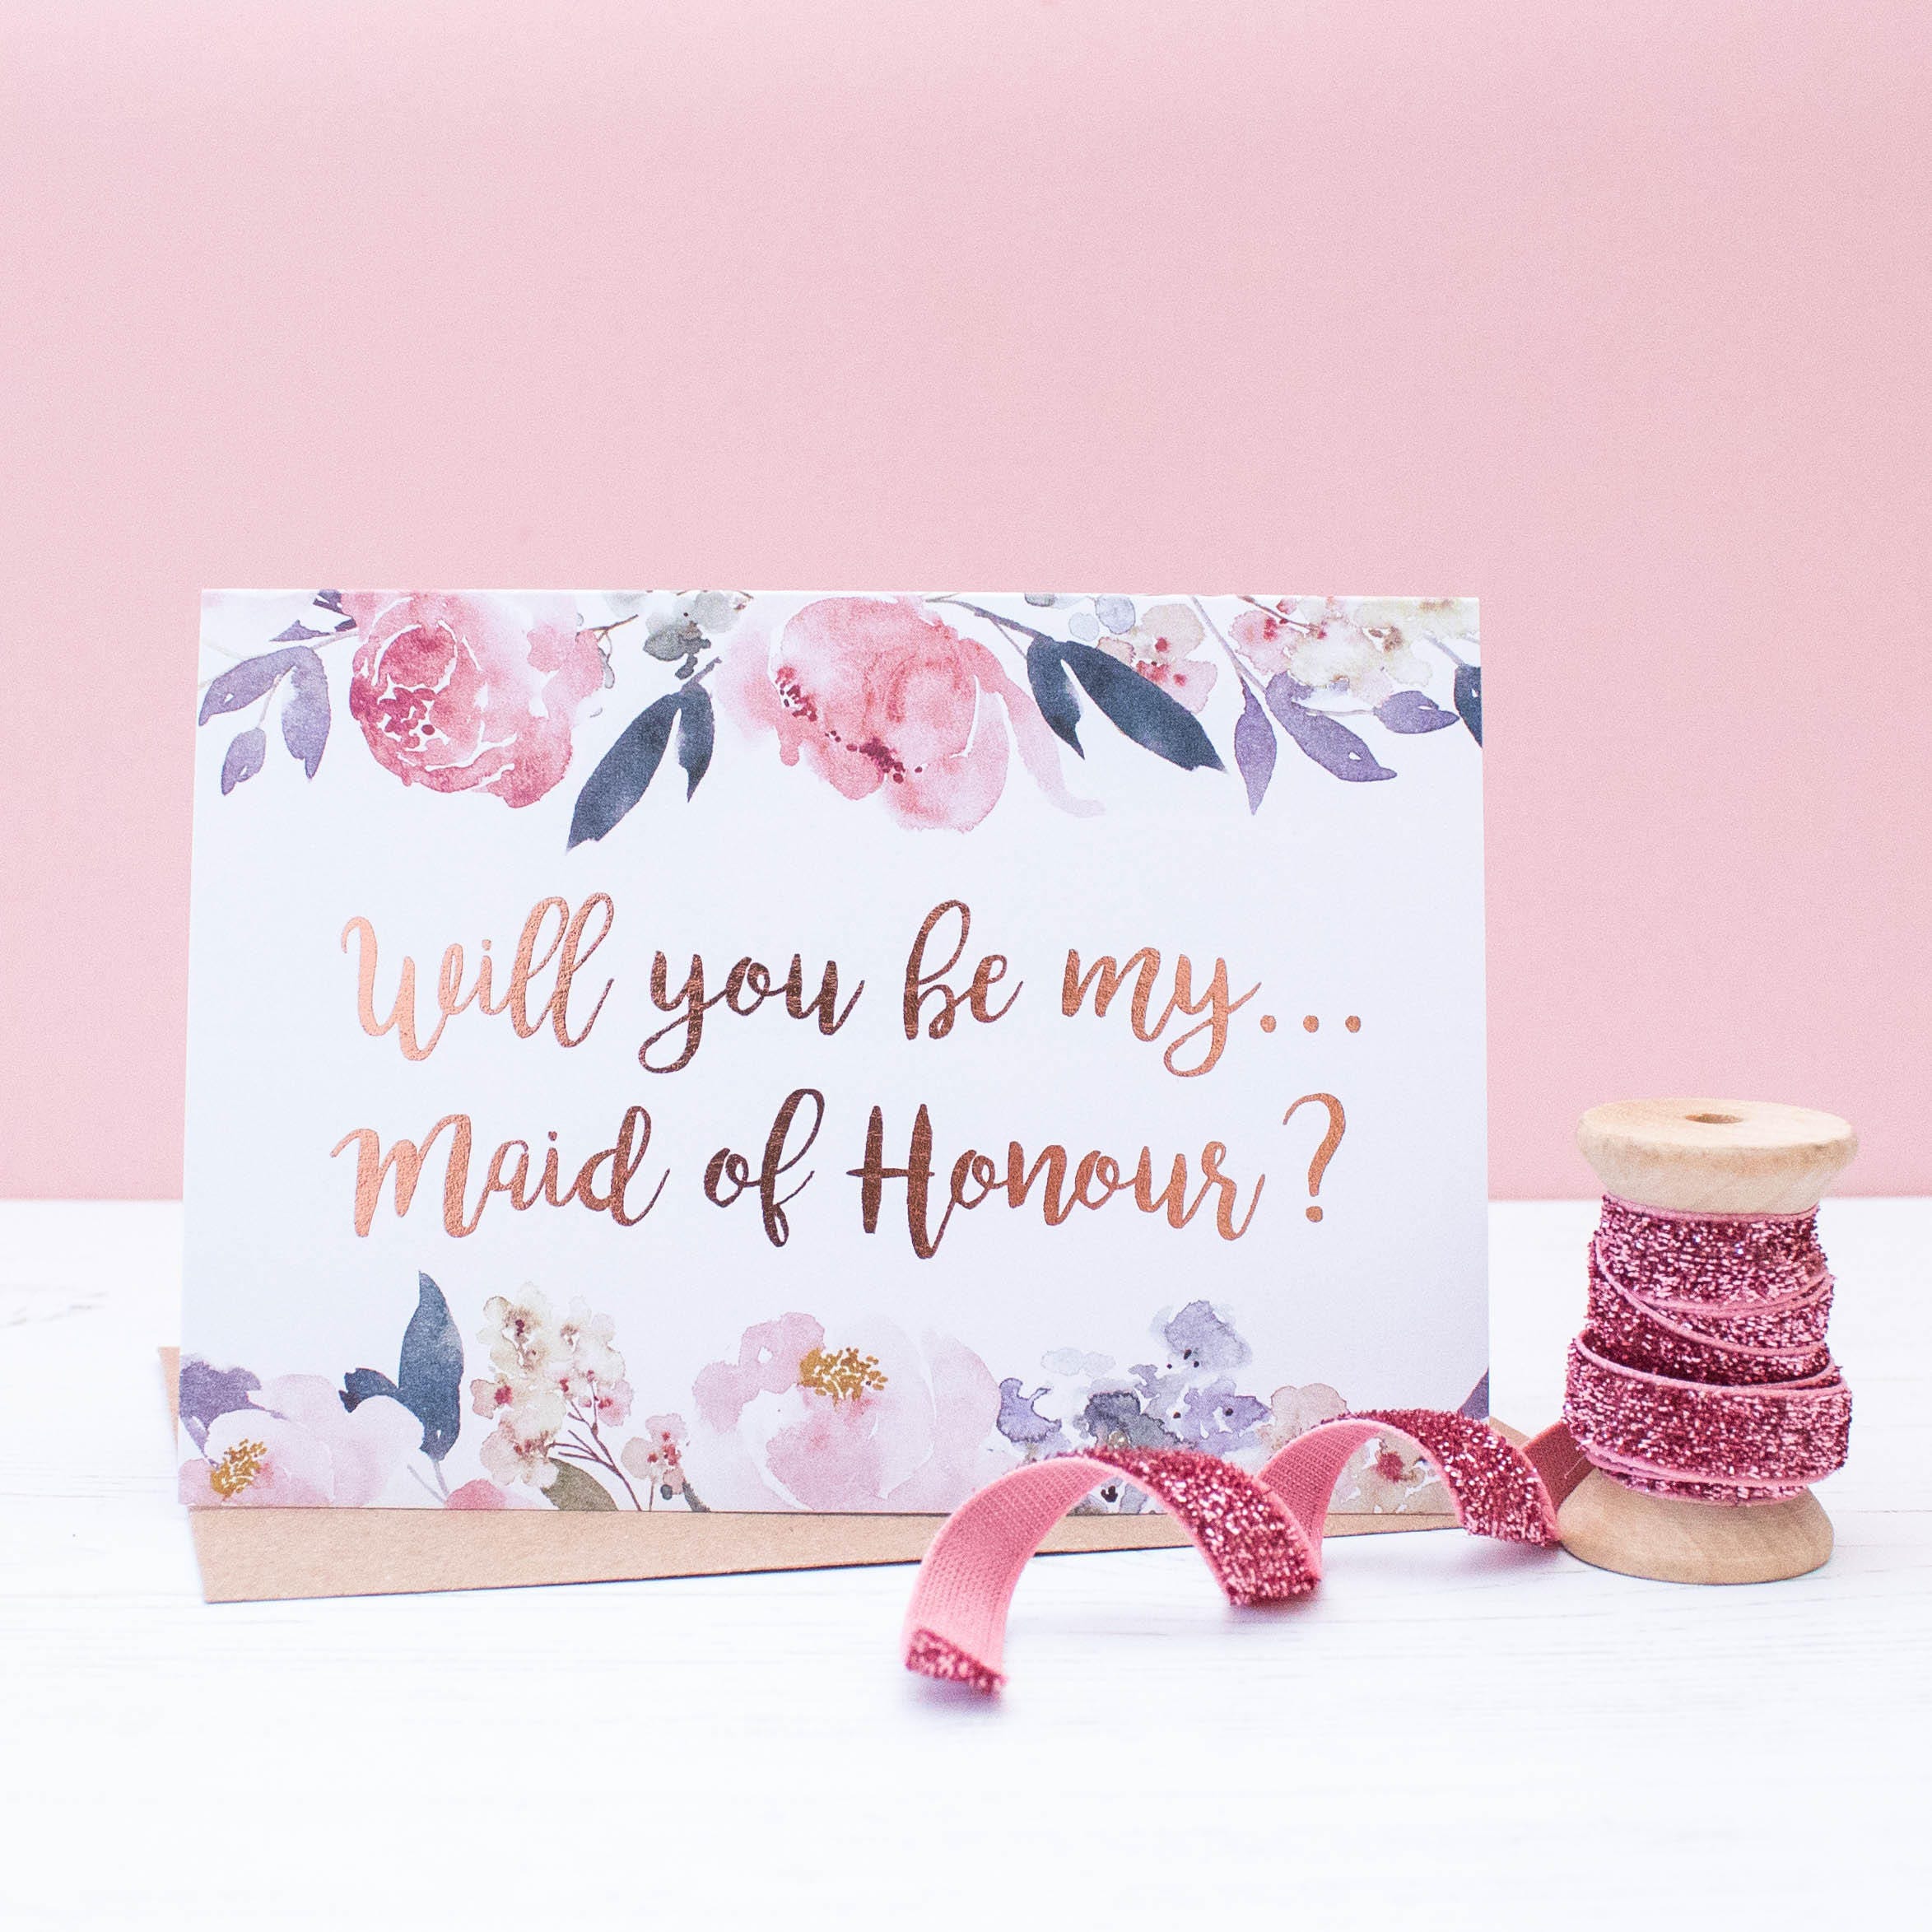 rose-gold-maid-of-honor-card-will-you-be-my-maid-of-honour